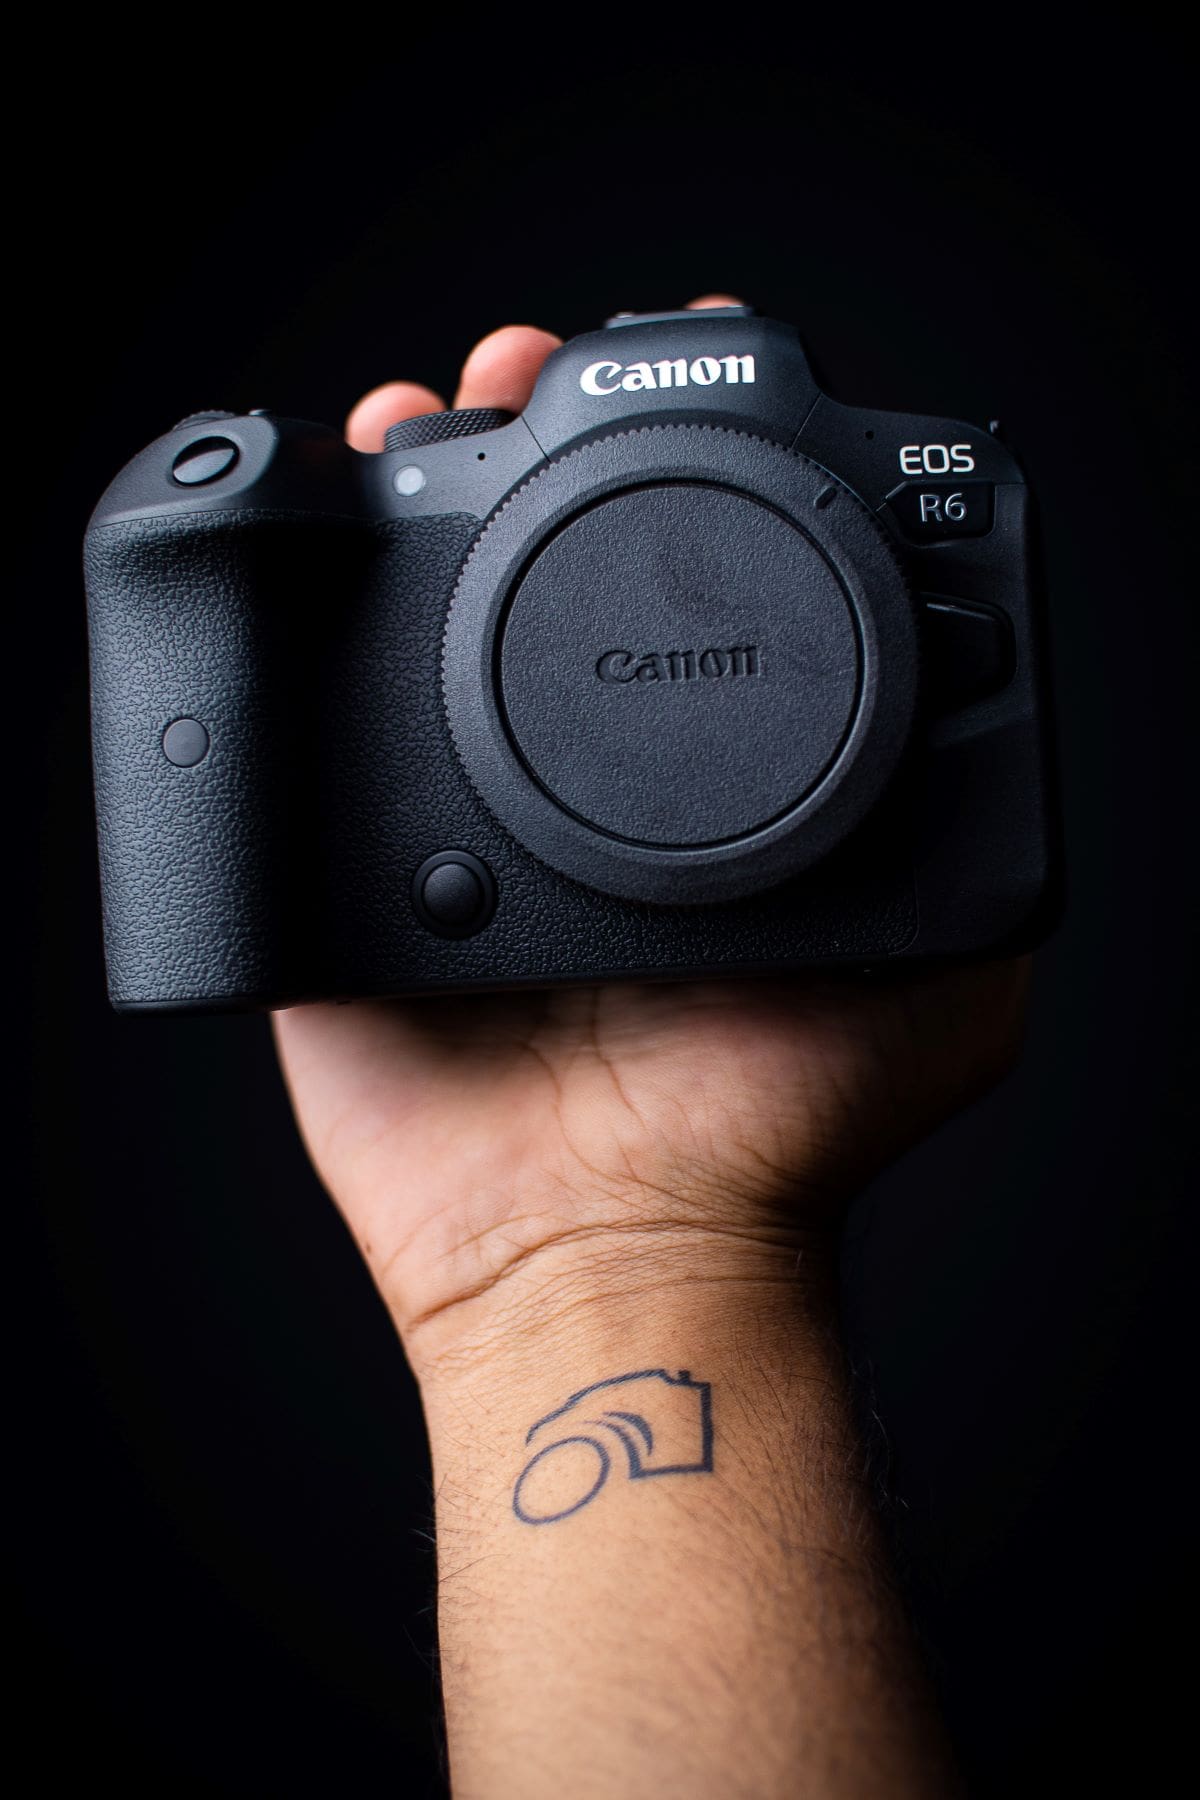 canon eos r6 in hand